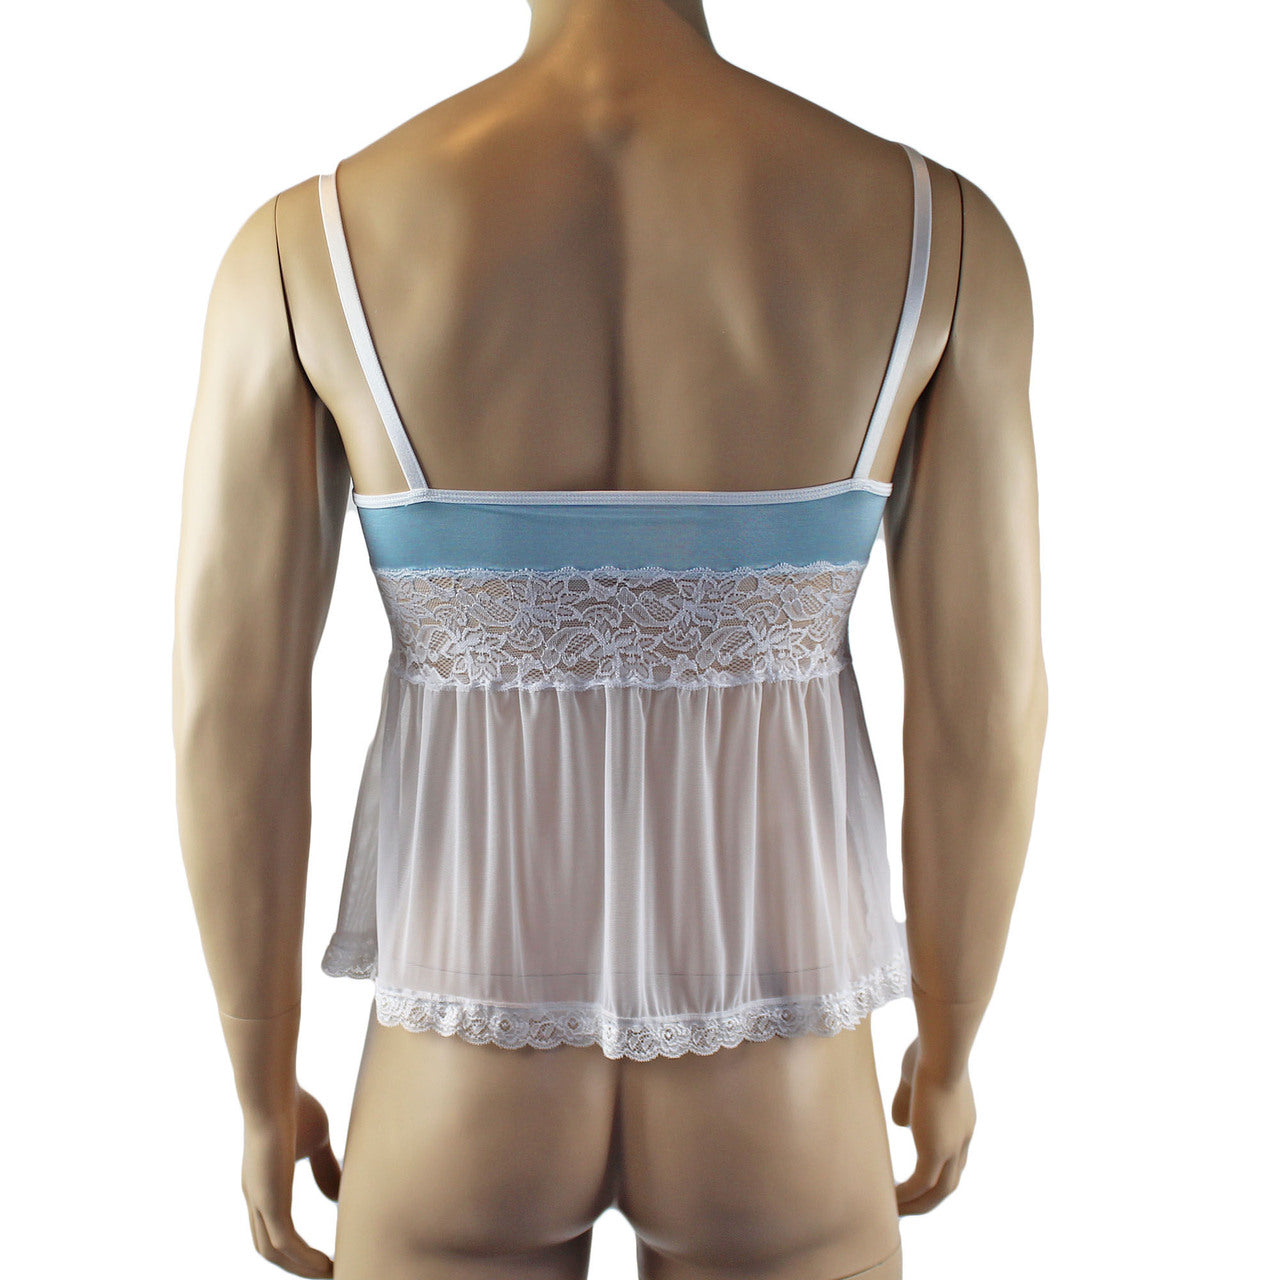 Mens Joanne Mini Babydoll Camisole - Sizes up to 3XL Light Blue & White